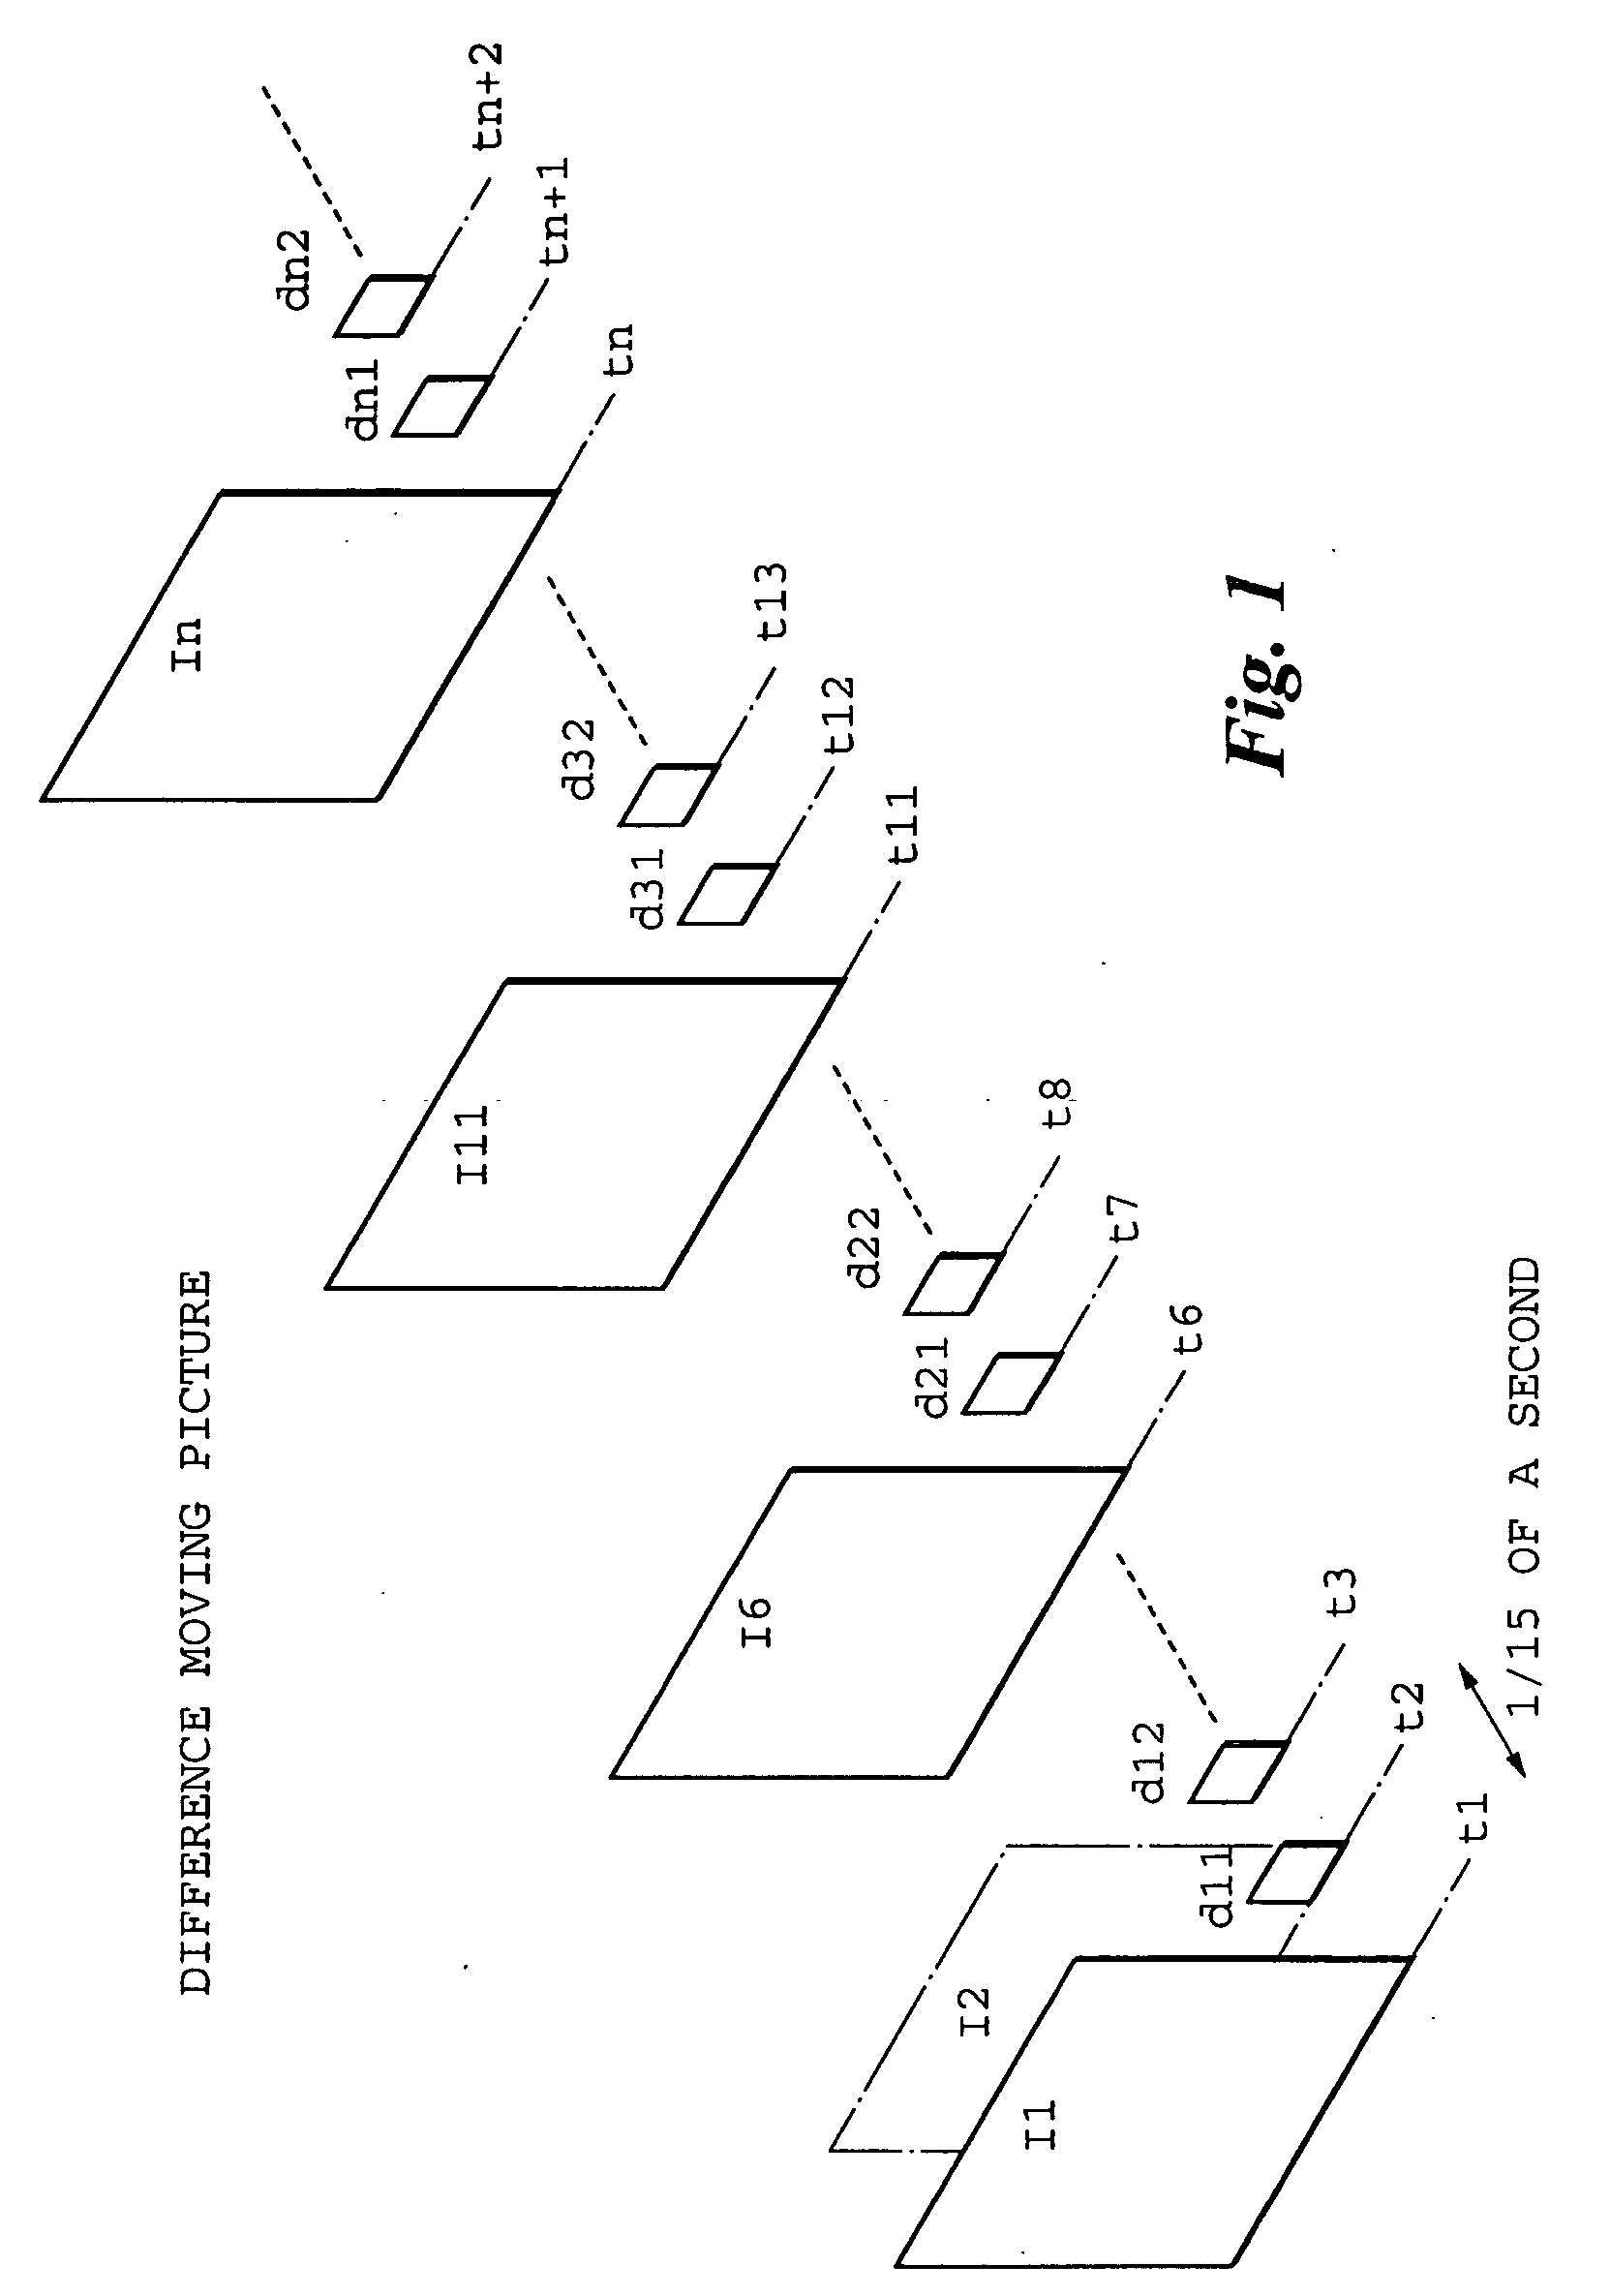 Moving picture server and method of controlling same